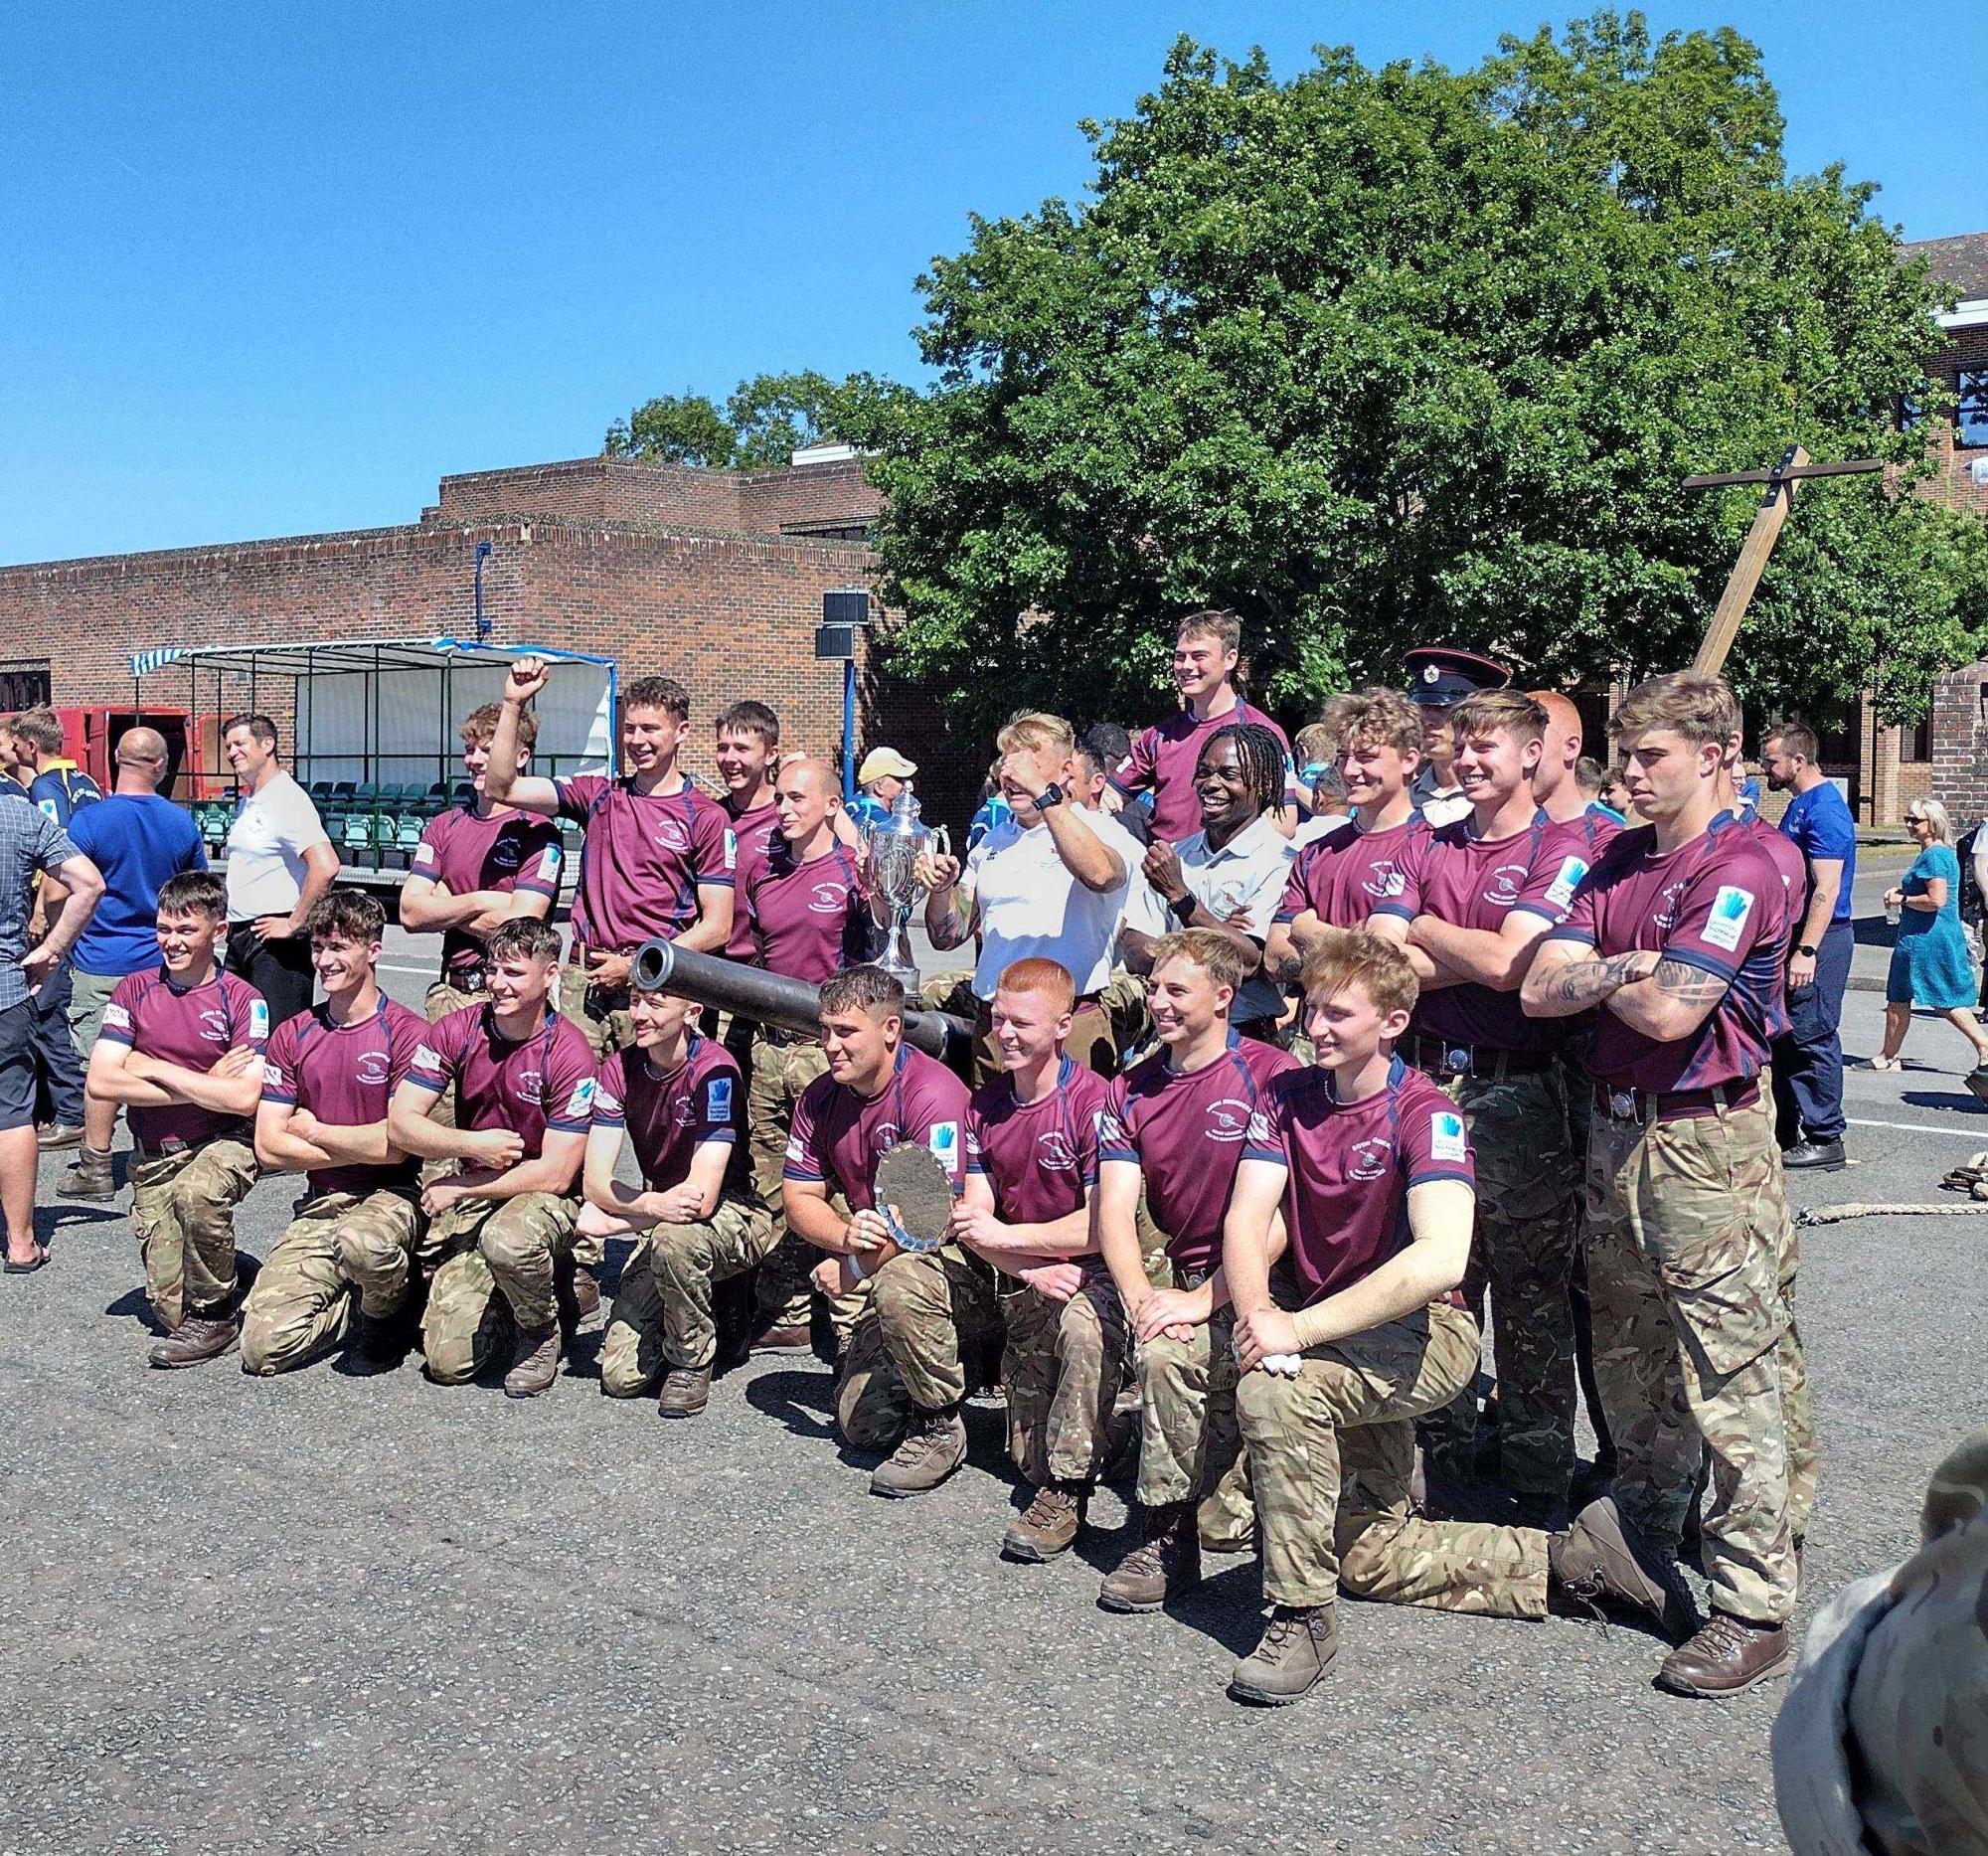 The Royal Engineers Junior Field Gun team with their trophy